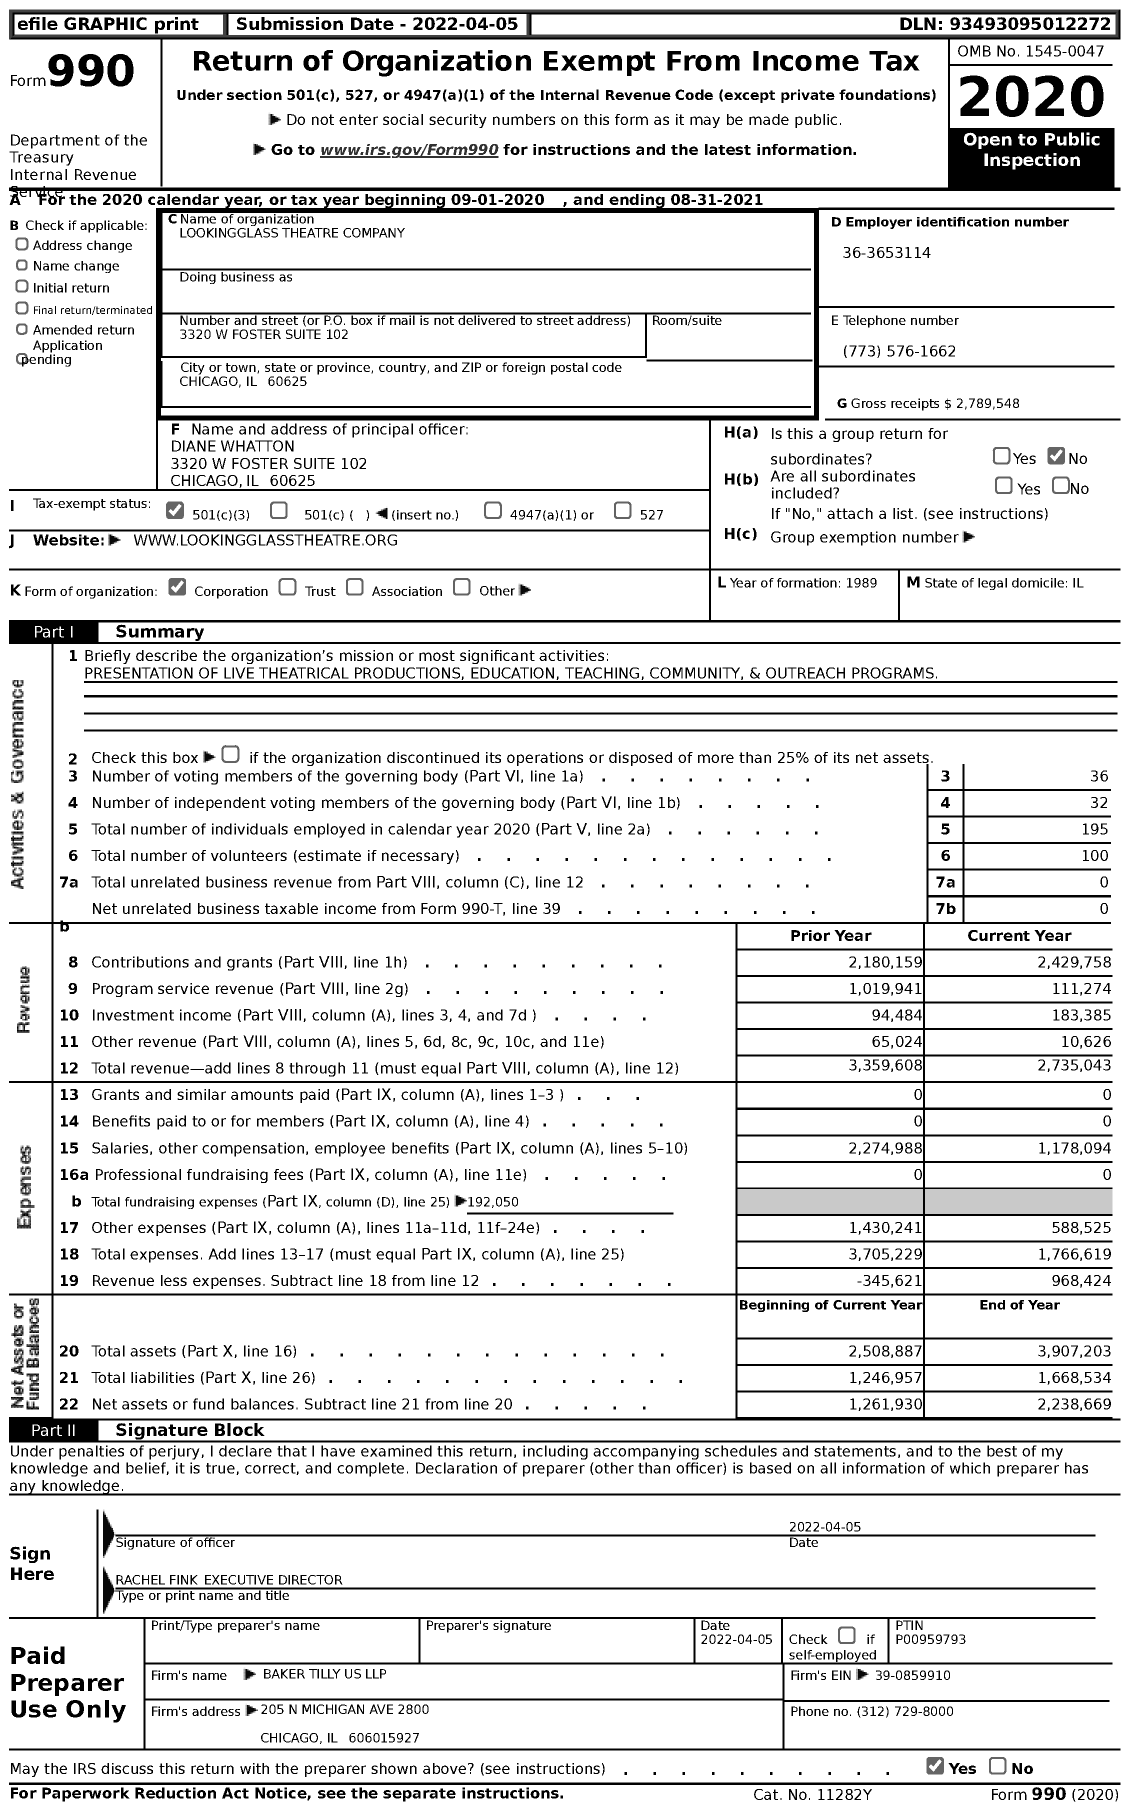 Image of first page of 2020 Form 990 for Lookingglass Theatre Company